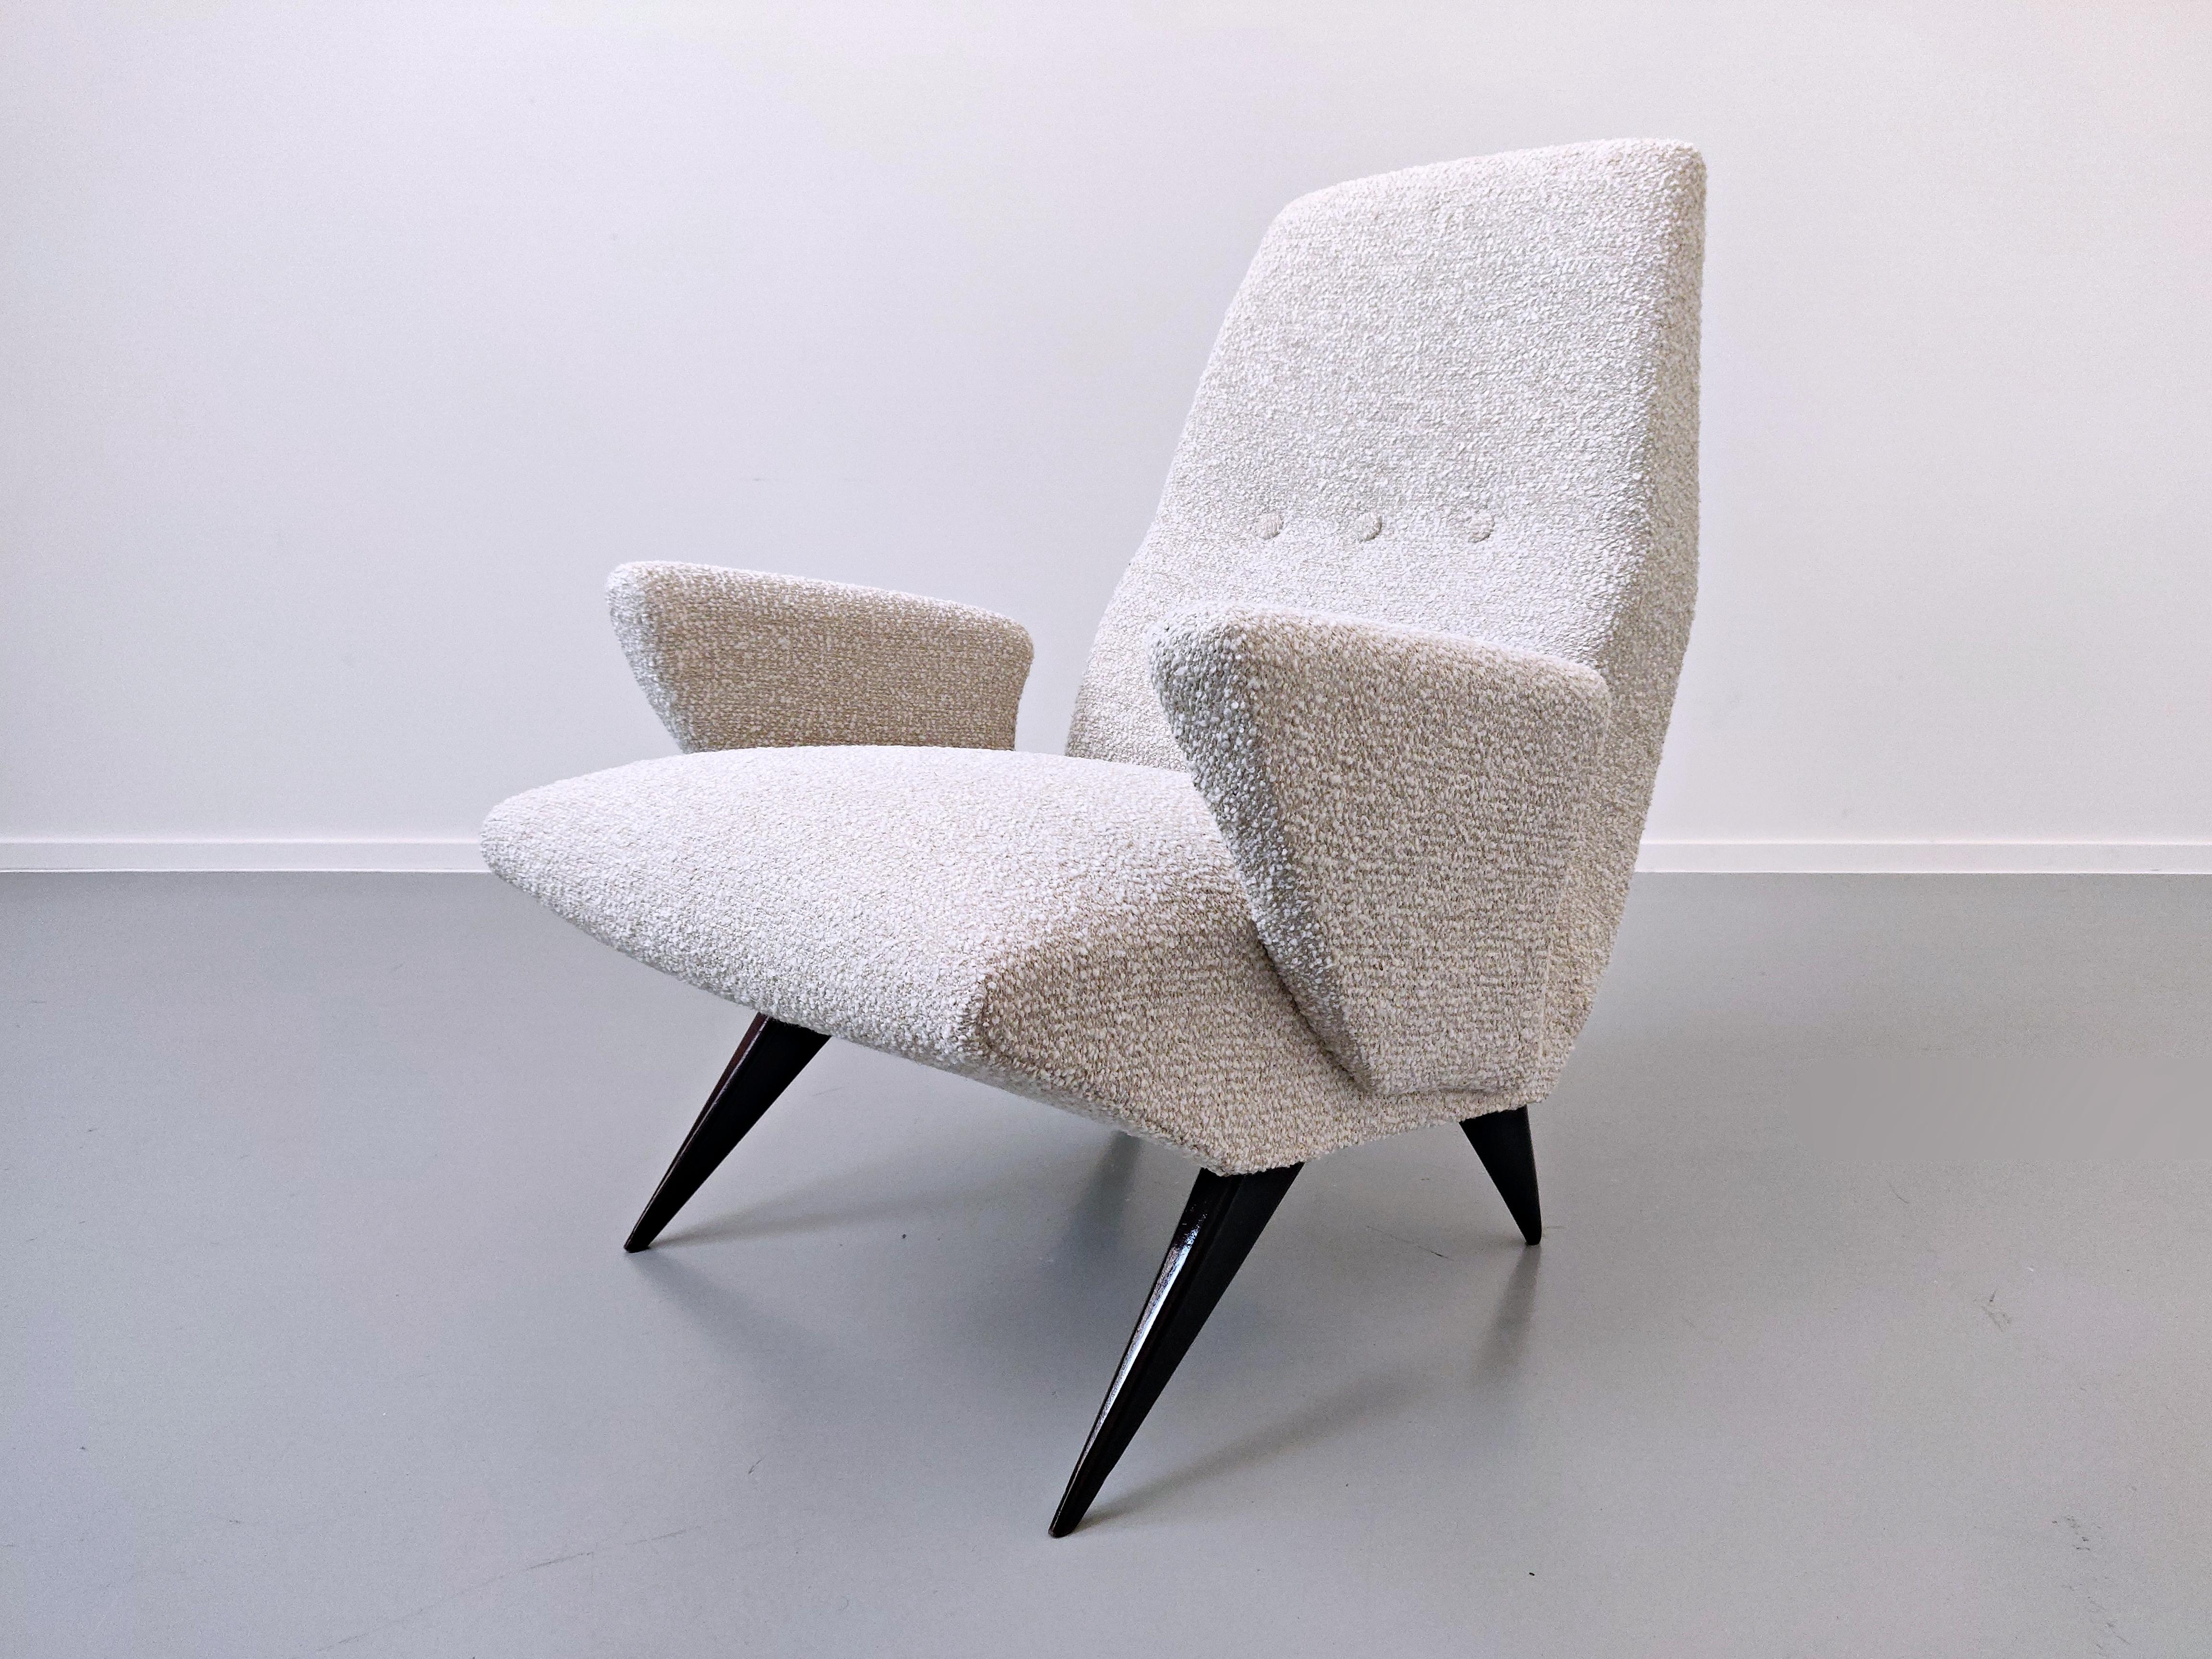 Pair of Mid-Century Modern  Armchairs by Nino Zoncada for Frimar, Italy  1